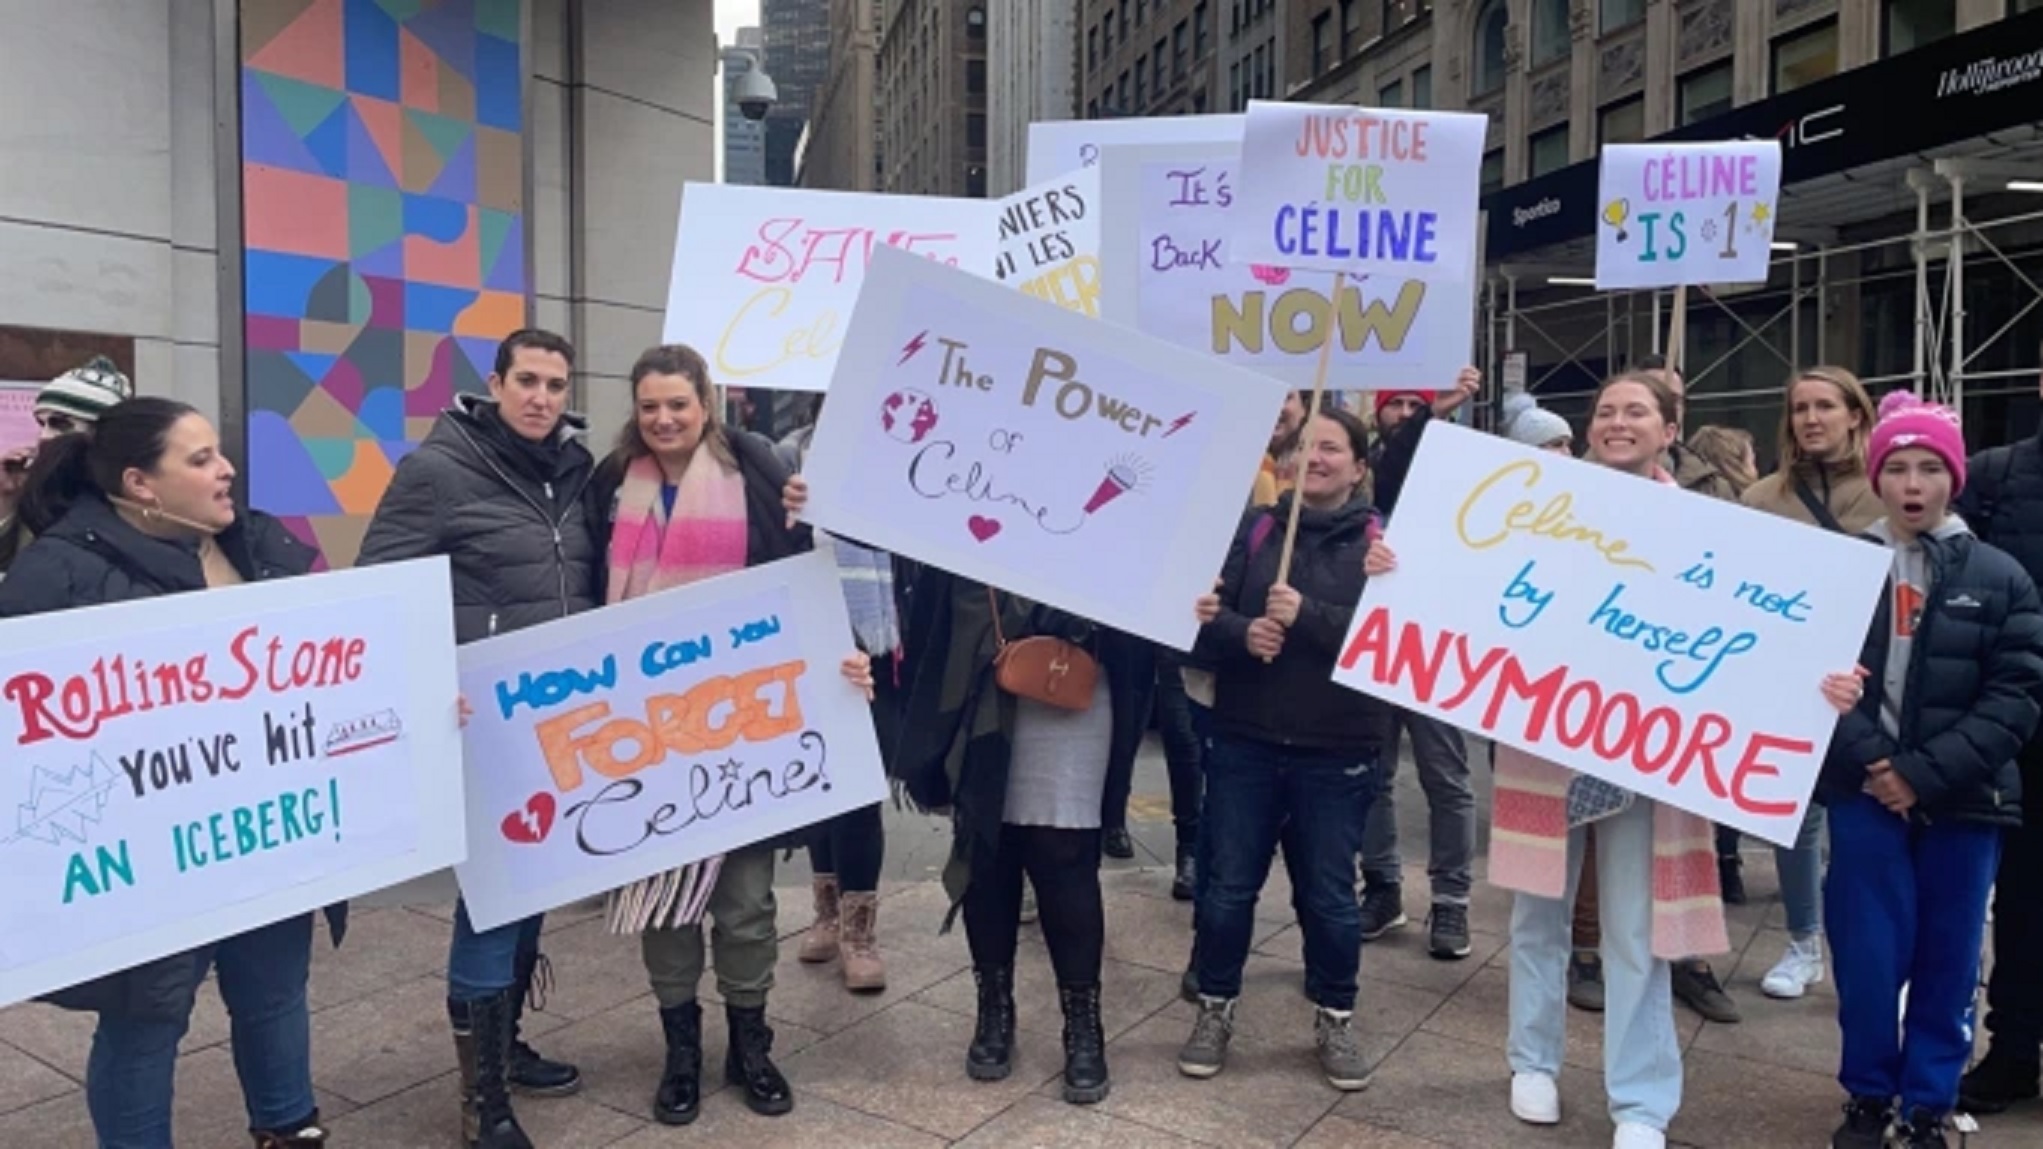 Celine Dion Fans Protest Outside Rolling Stone Office After Her Omission From ‘Greatest Singers’ List